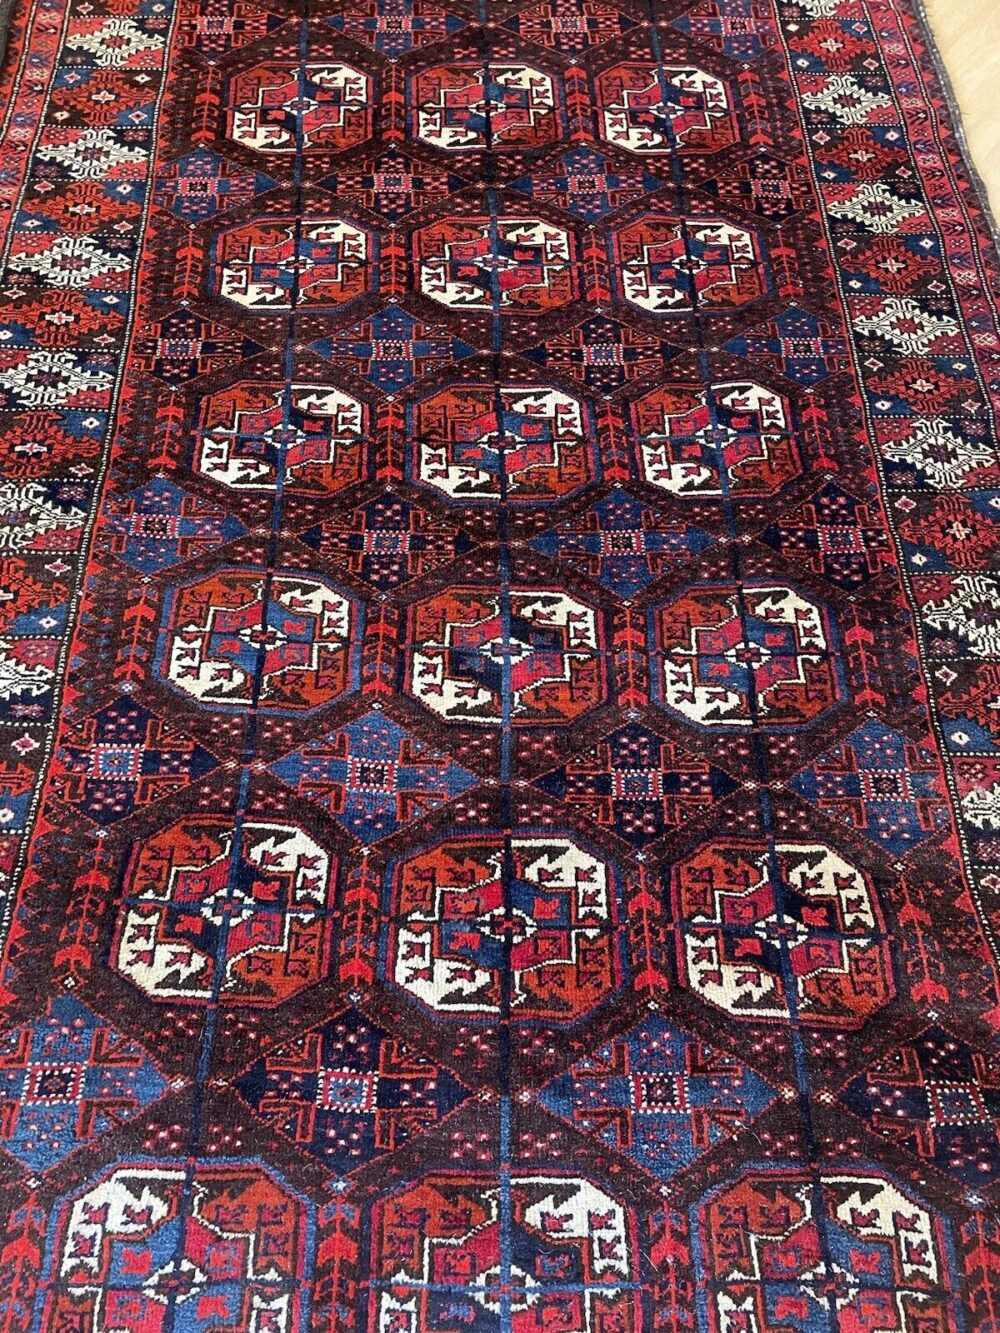 ANTIQUE RUSSIAN BOCHARA 100 YEARS OLD TOP CONDITION HAND KNOTTED 200X130 206799 PERSIAN RUG ORIENTAL RUG